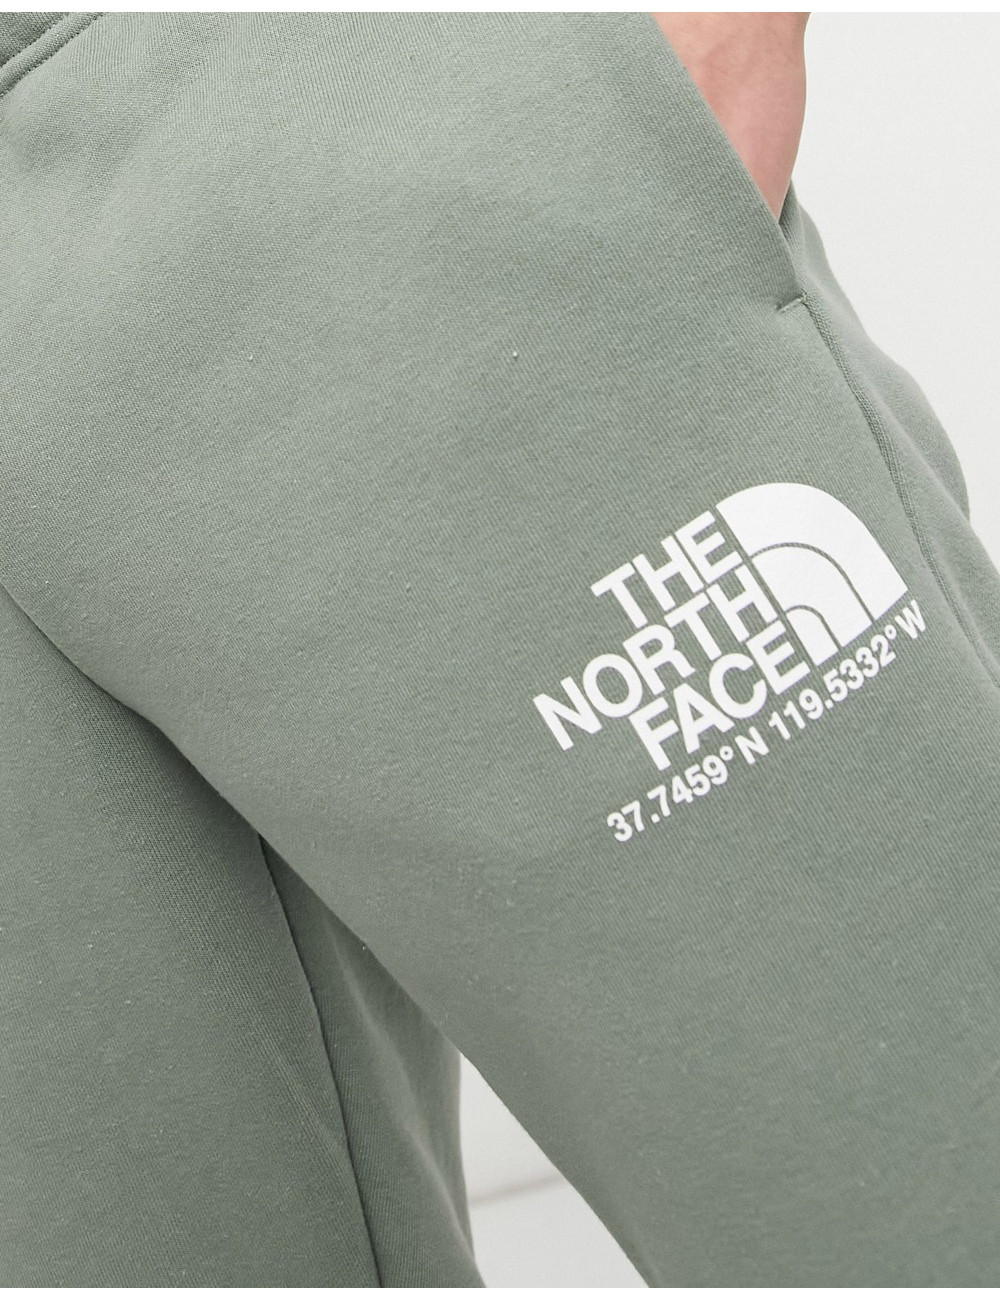 The North Face Logo +...